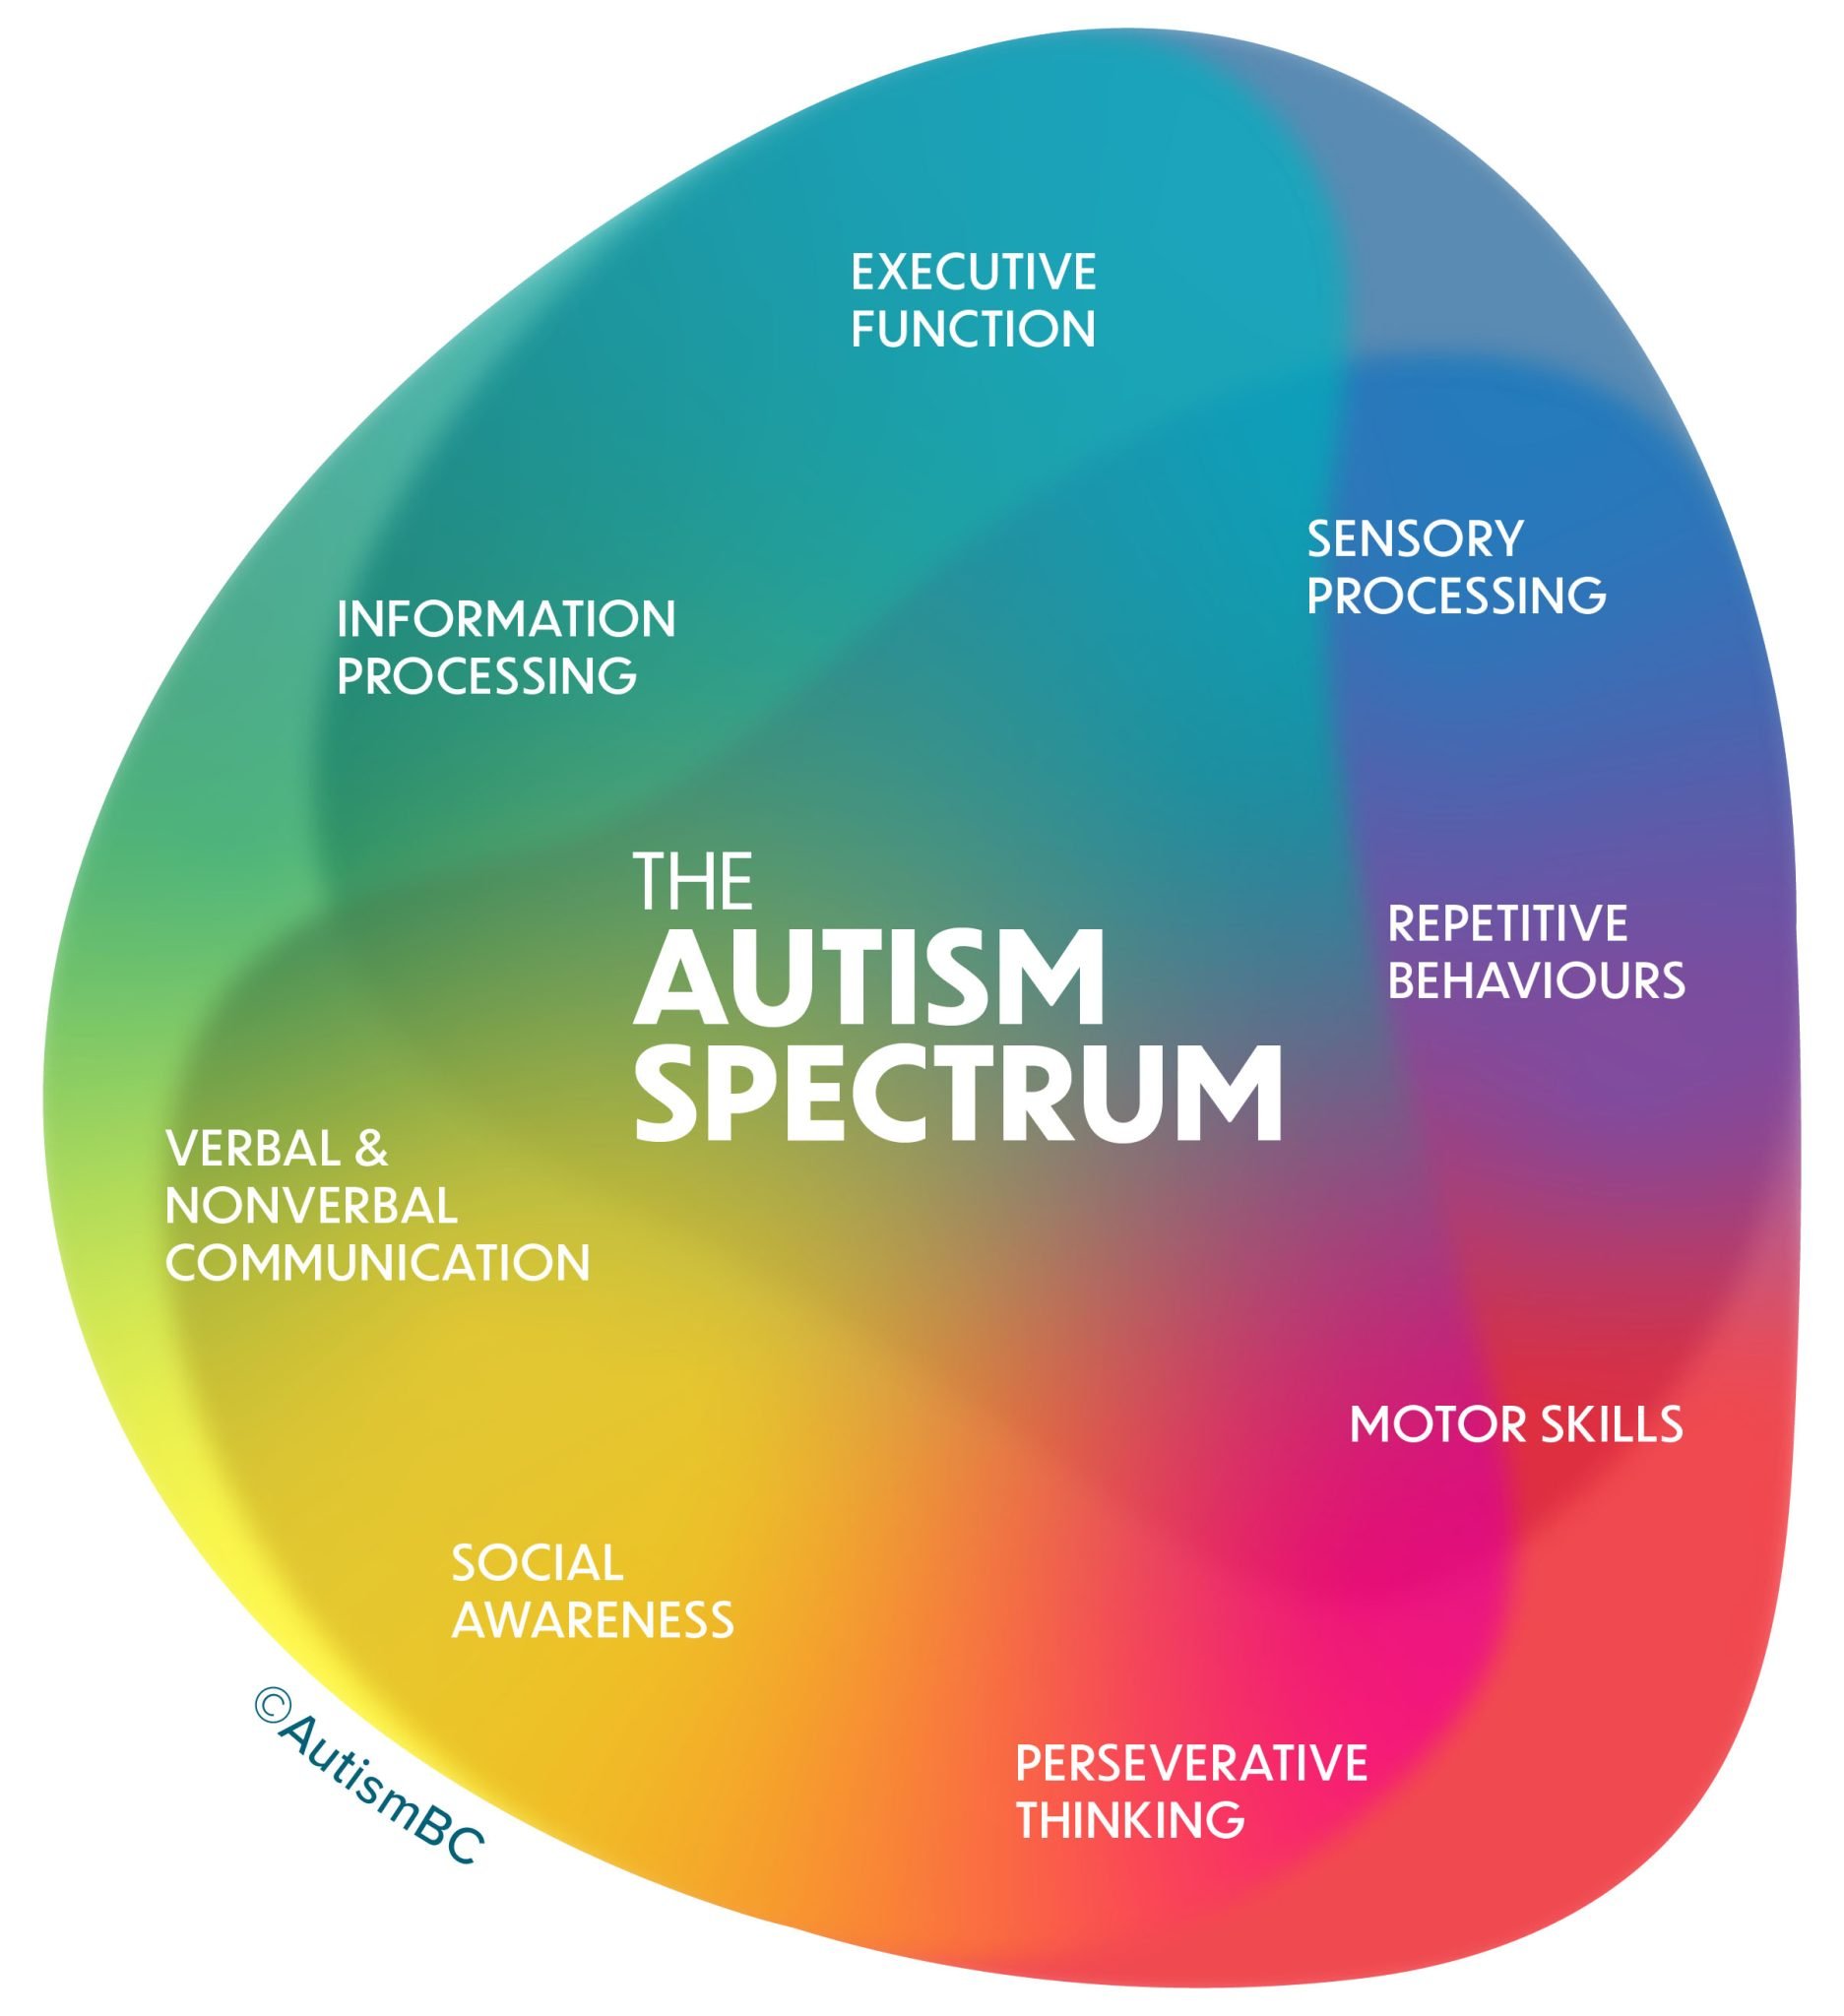 current research on autistic spectrum disorder